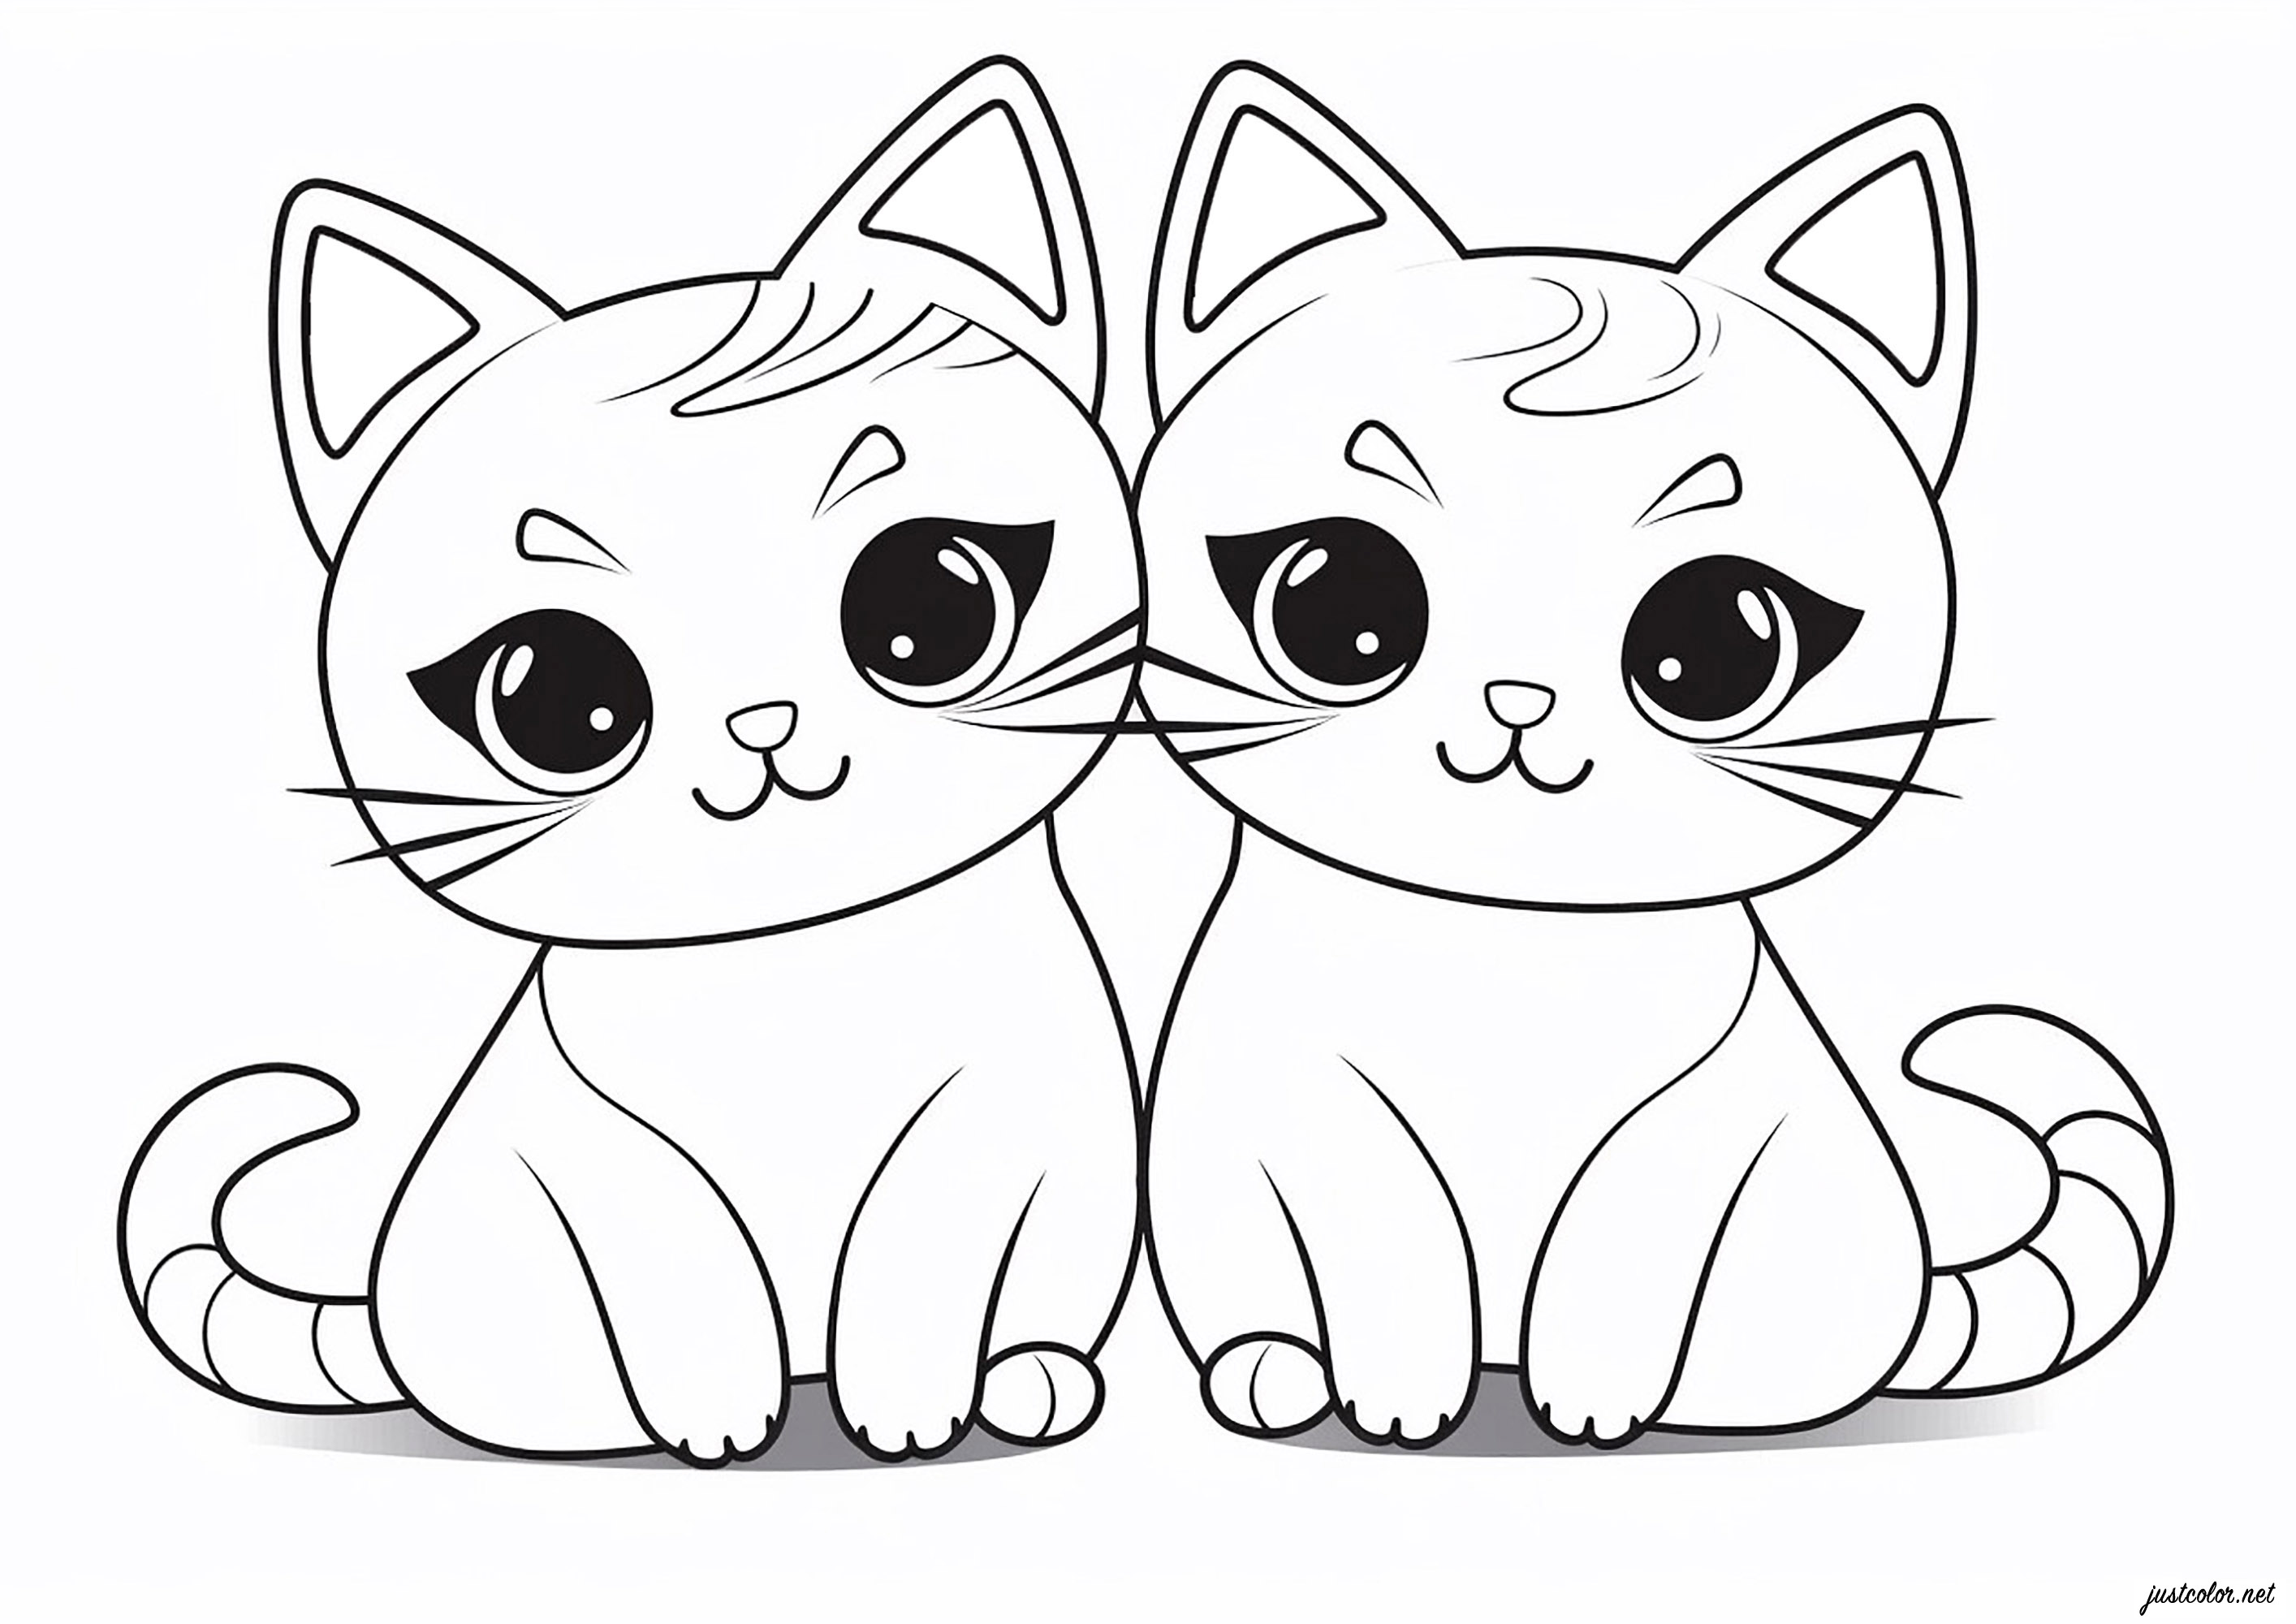 Two cats drawn in the simple kawaii style